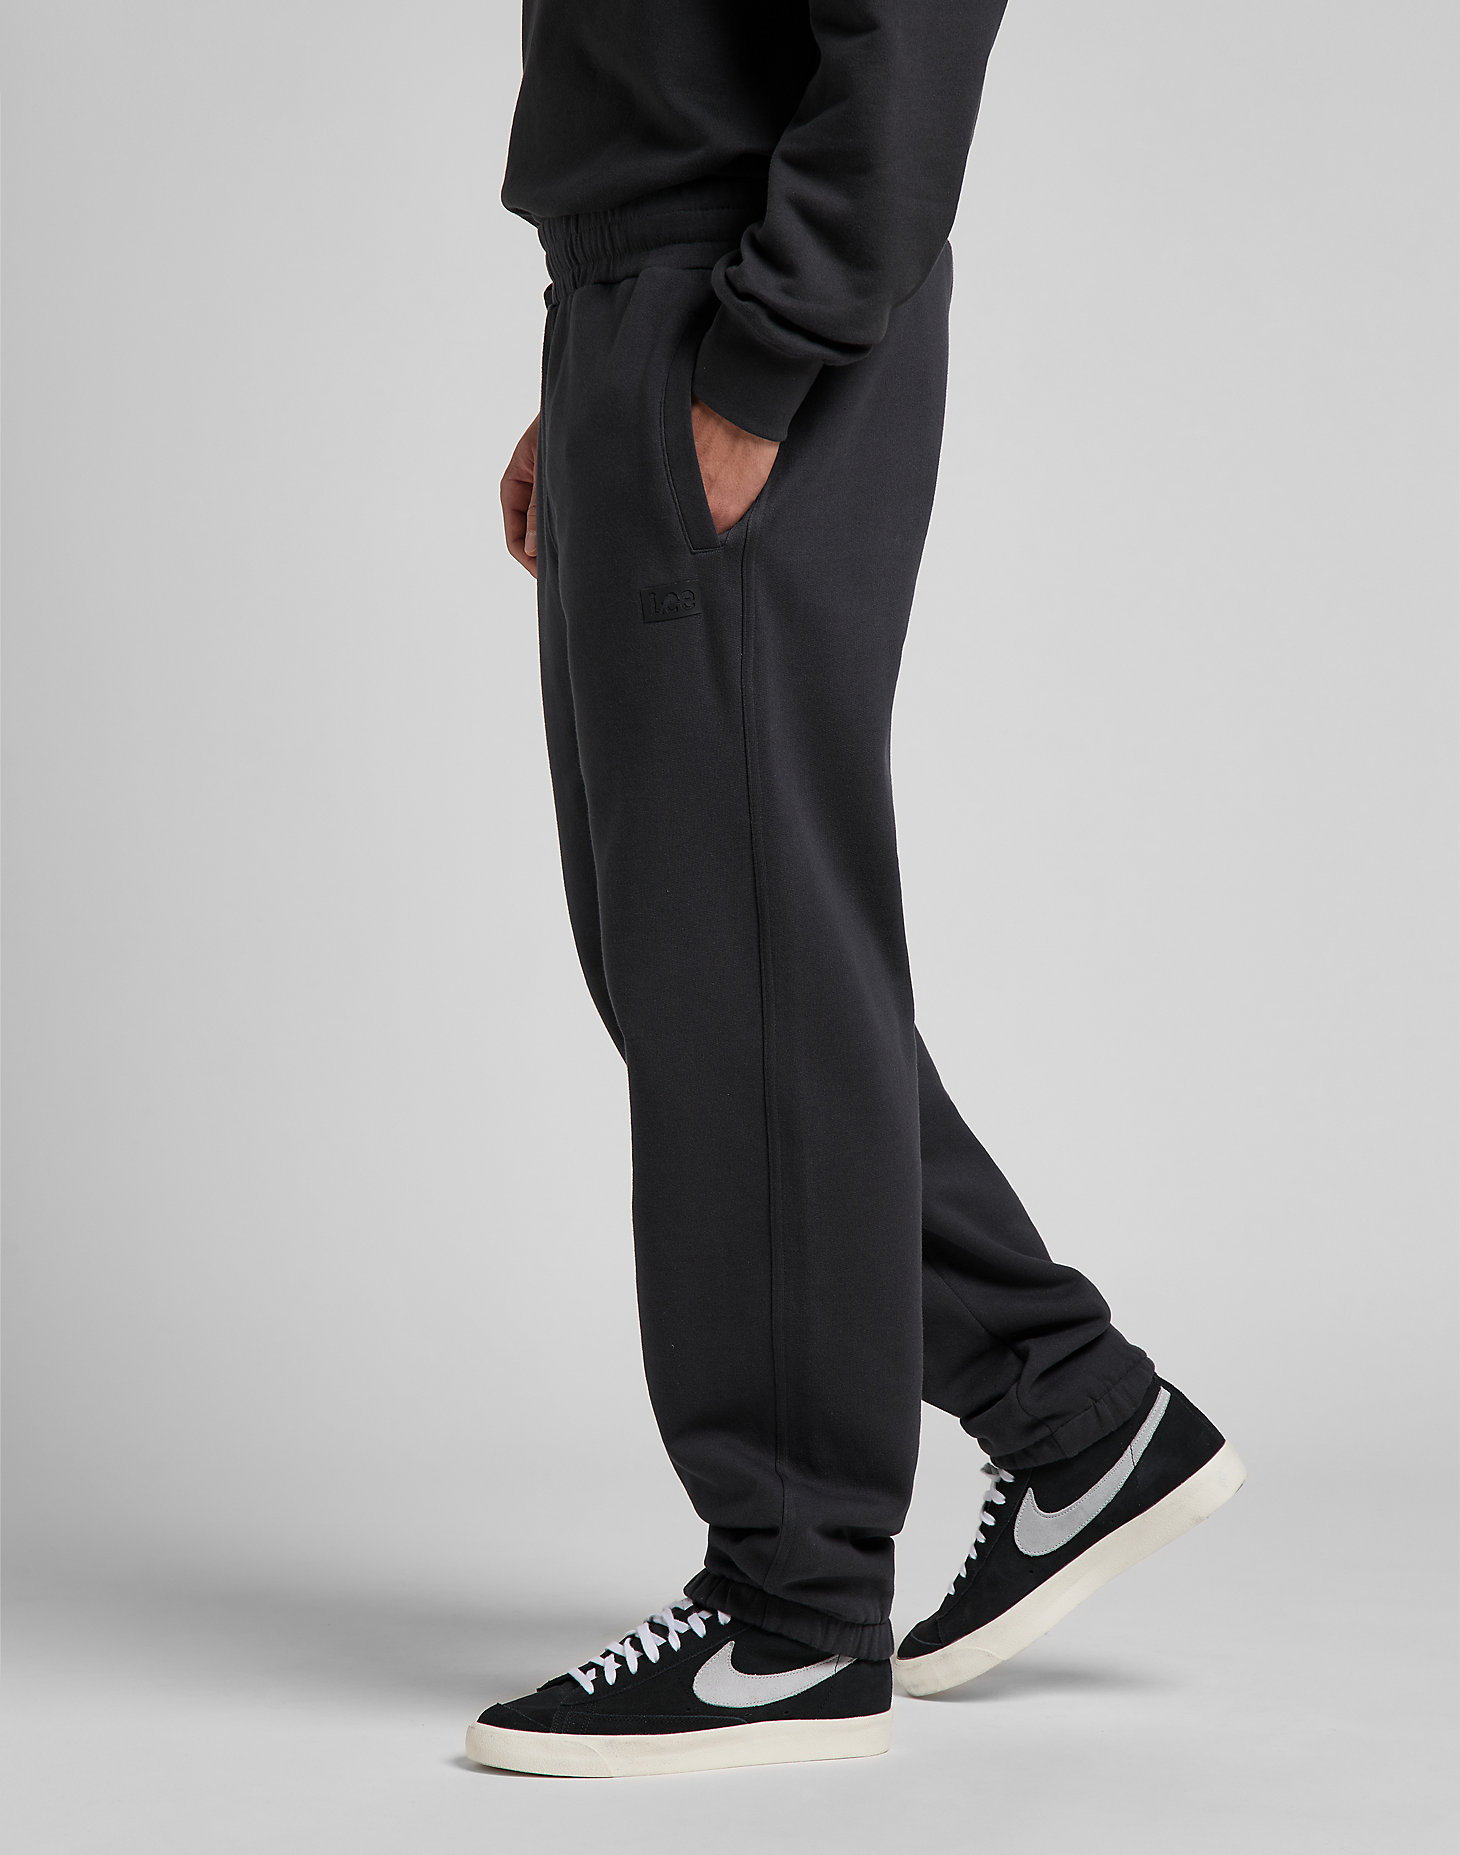 Sweat Pant in Washed Black alternative view 3